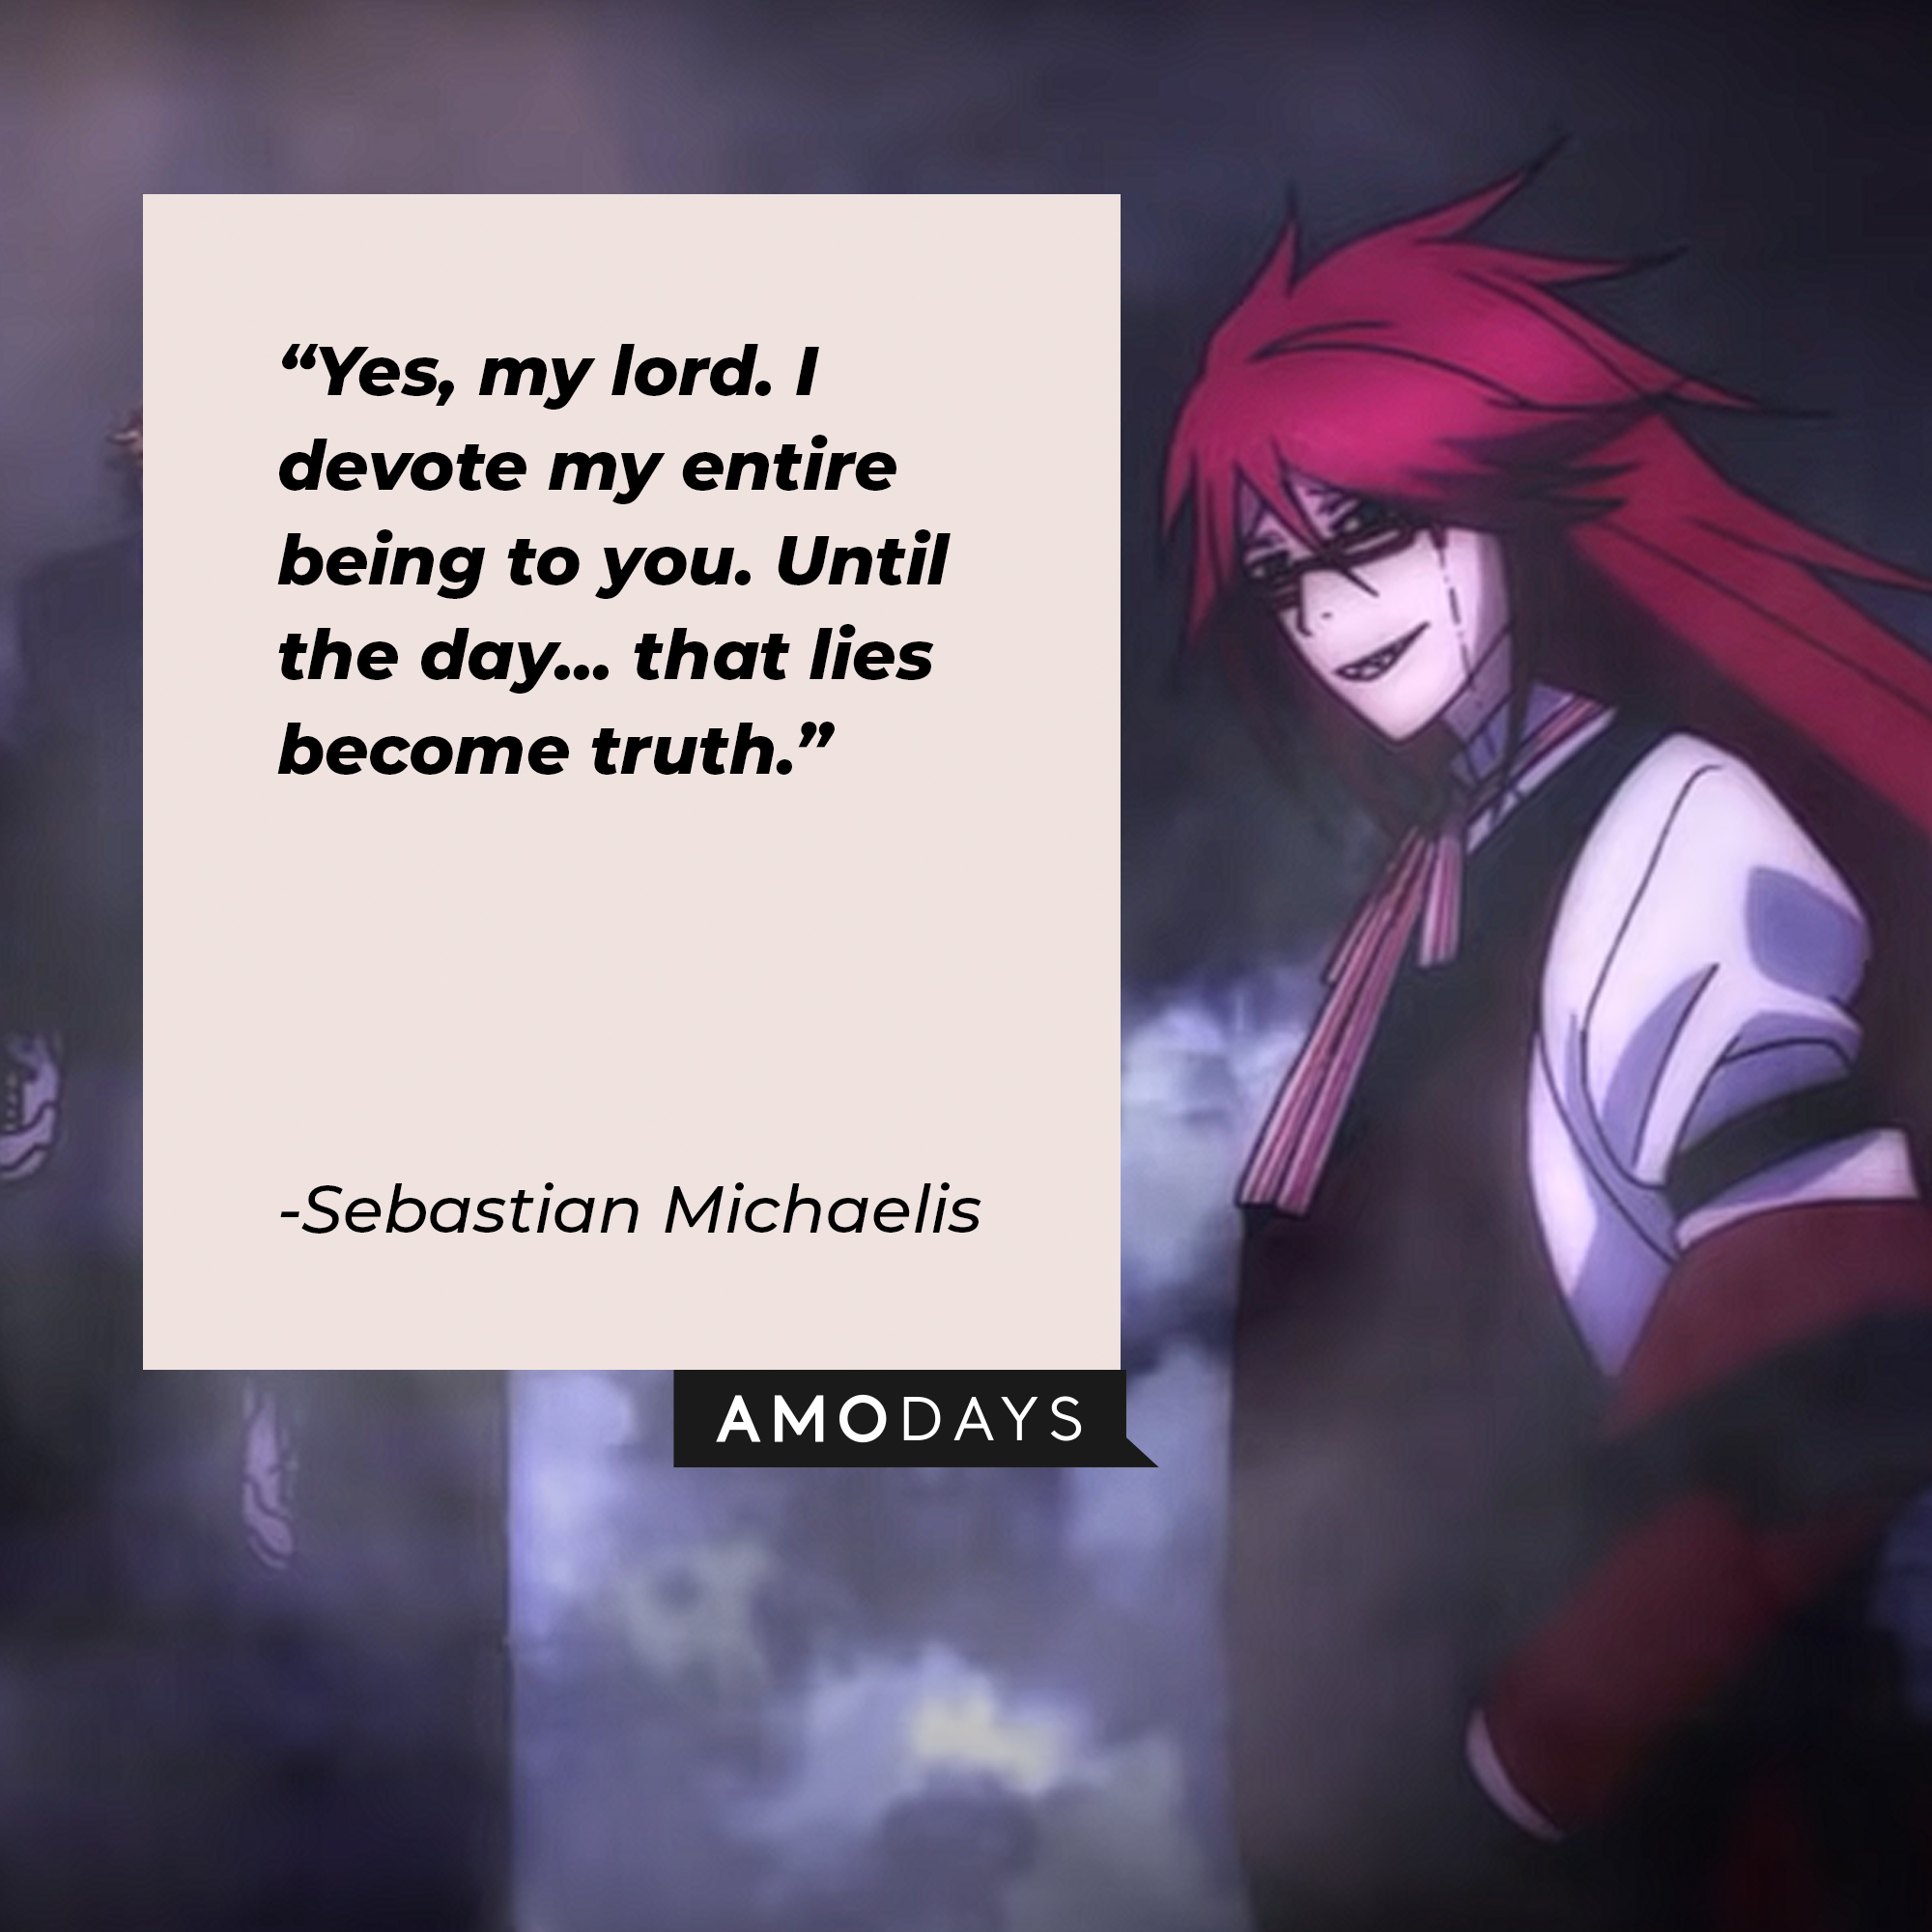 An image from "Black Butler" with Sebastian Michaelis' quote: "Yes, my lord. I devote my entire being to you. Until the day... that lies become truth." | Source: youtube.com/Crunchyroll Dubs